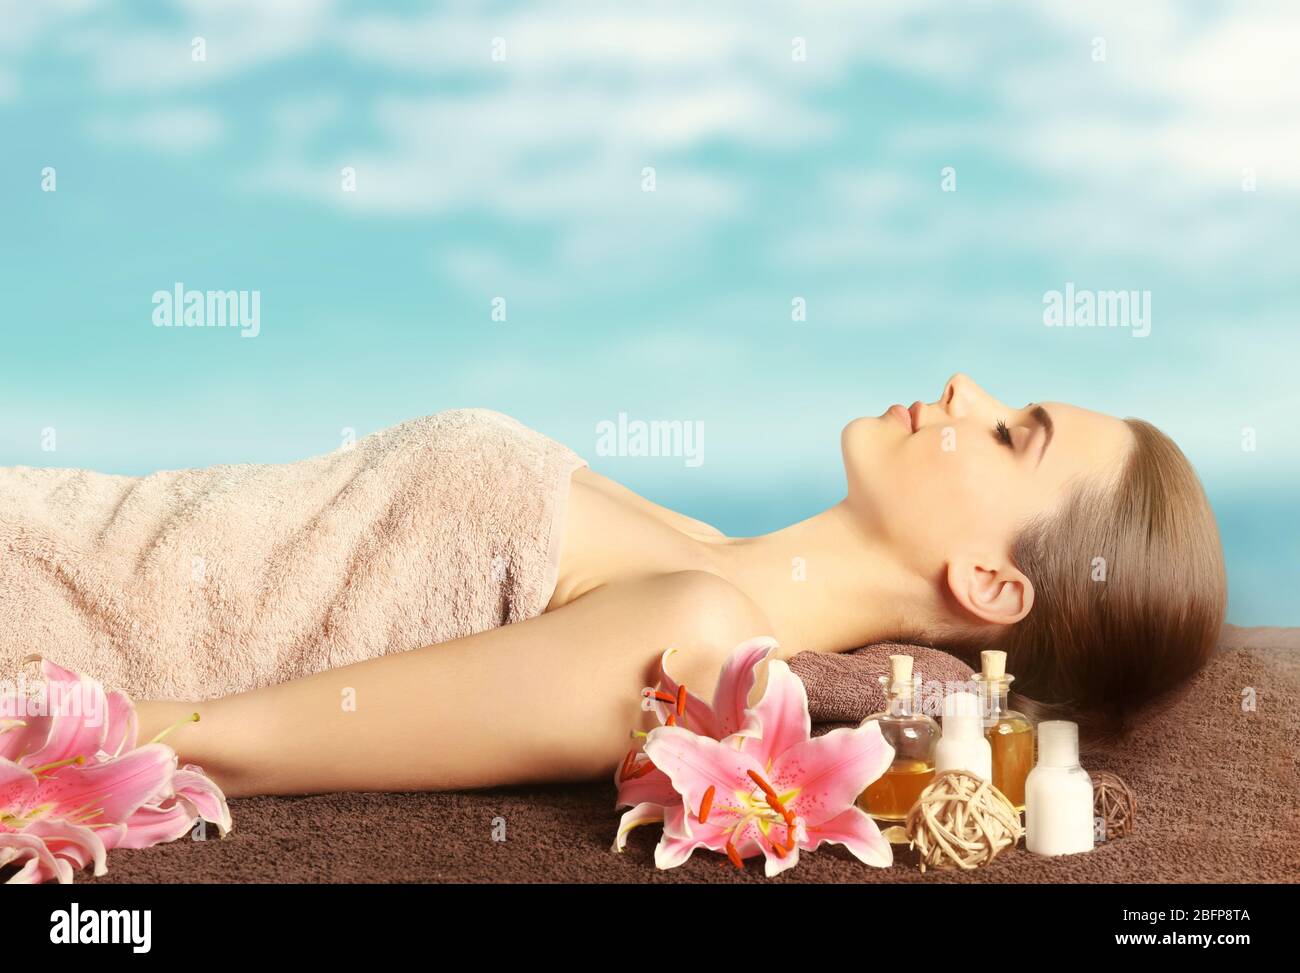 Spa concept. Beautiful woman having massage on table. Blurred blue  background Stock Photo - Alamy